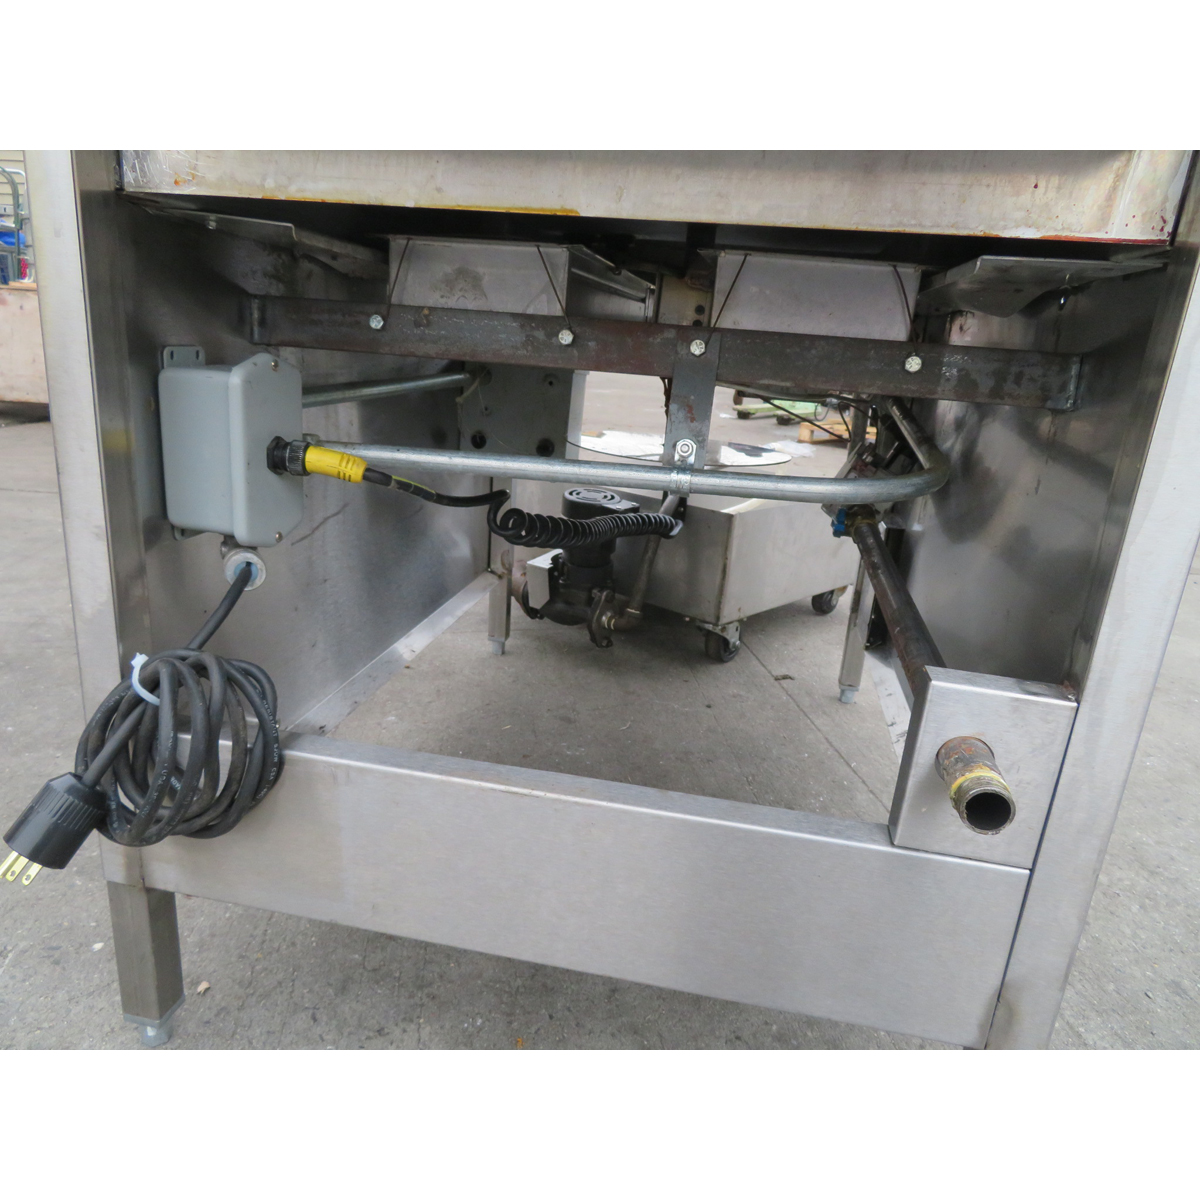 Lucks G1826 Gas Donut Fryer with Filtration System, Used Good Condition image 9